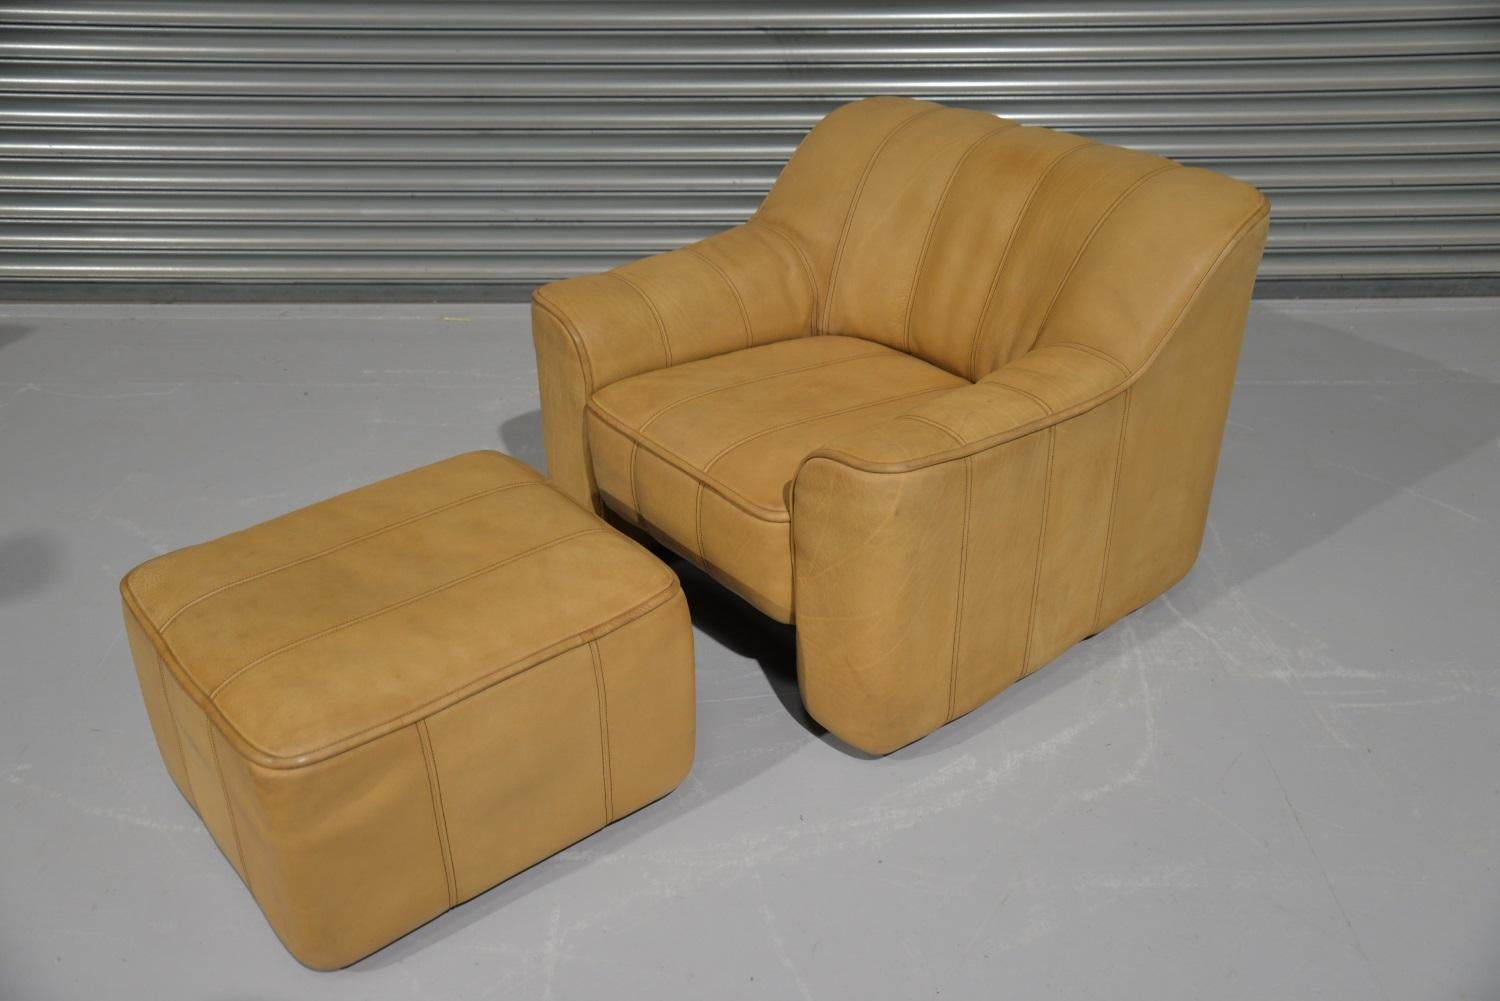 Discounted airfreight for our International customers (from 2 weeks door to door).

We are delighted to bring to you a vintage 1970s De Sede DS 44 armchair and matching ottoman in thick buffalo leather with handstitched detail. This vintage lounge